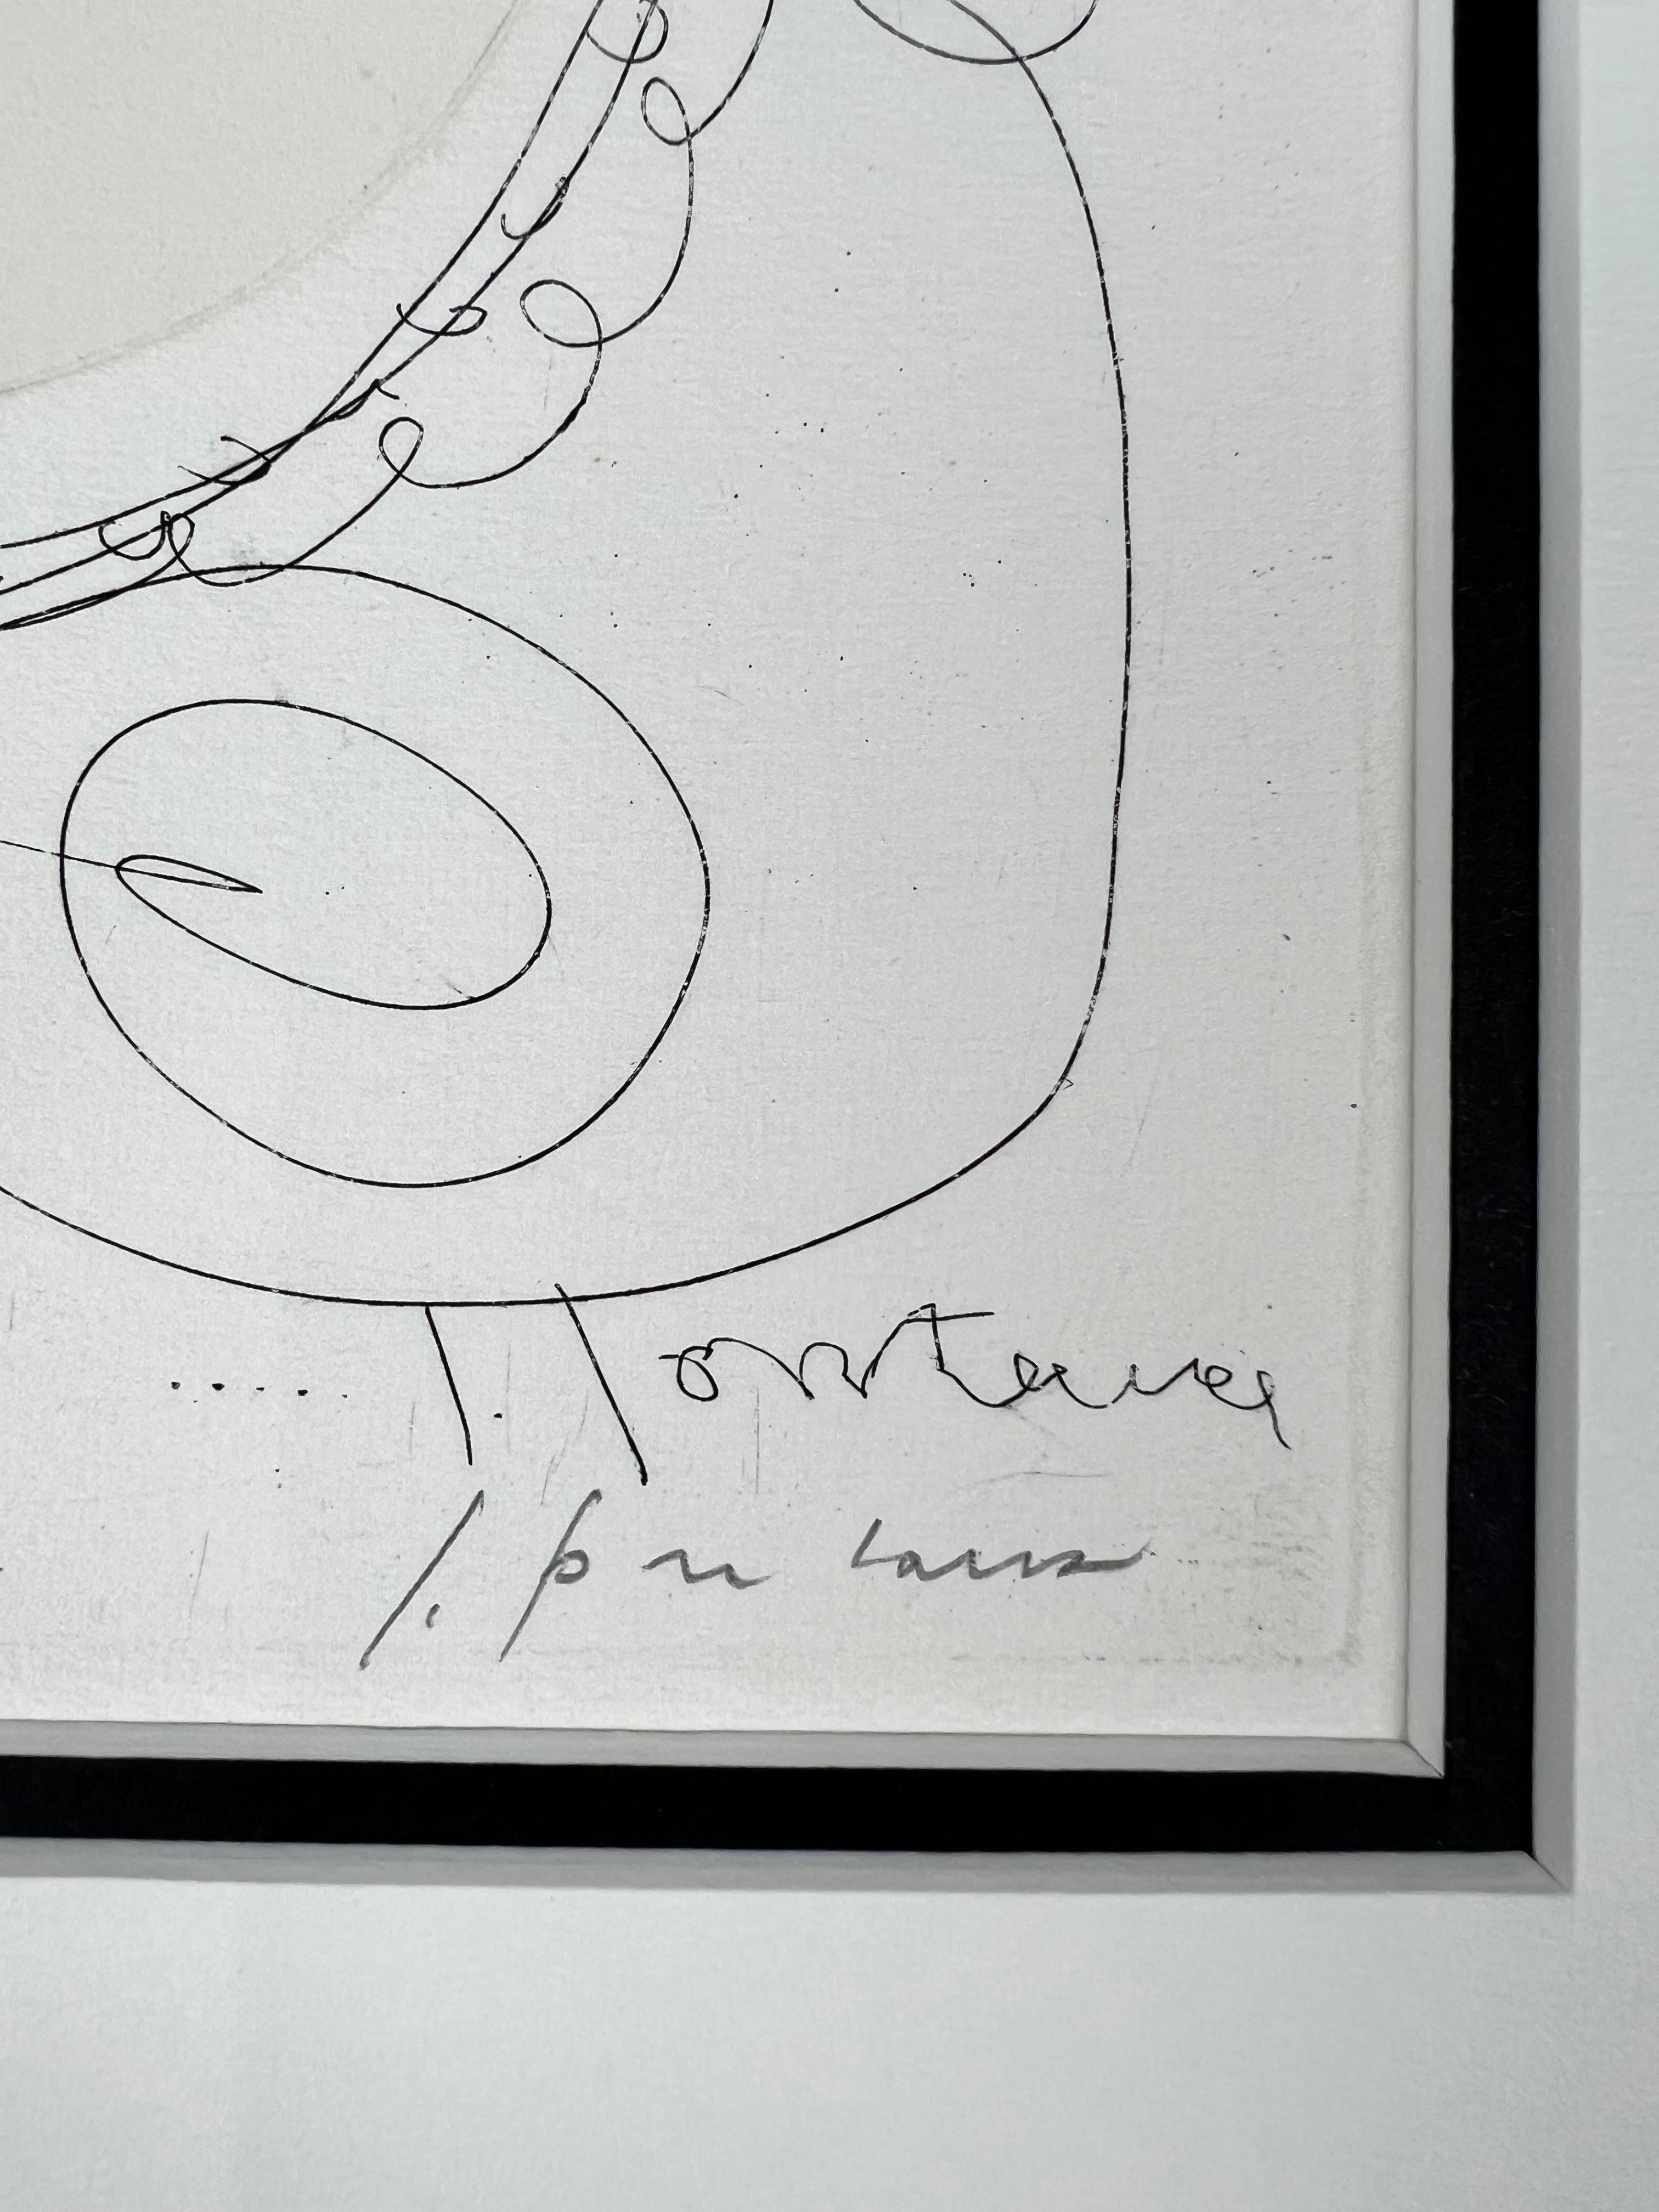 Lucio Fontana ( 1899 – 1968 ) – etching with cut executed by Lucio Fontana -1966 3